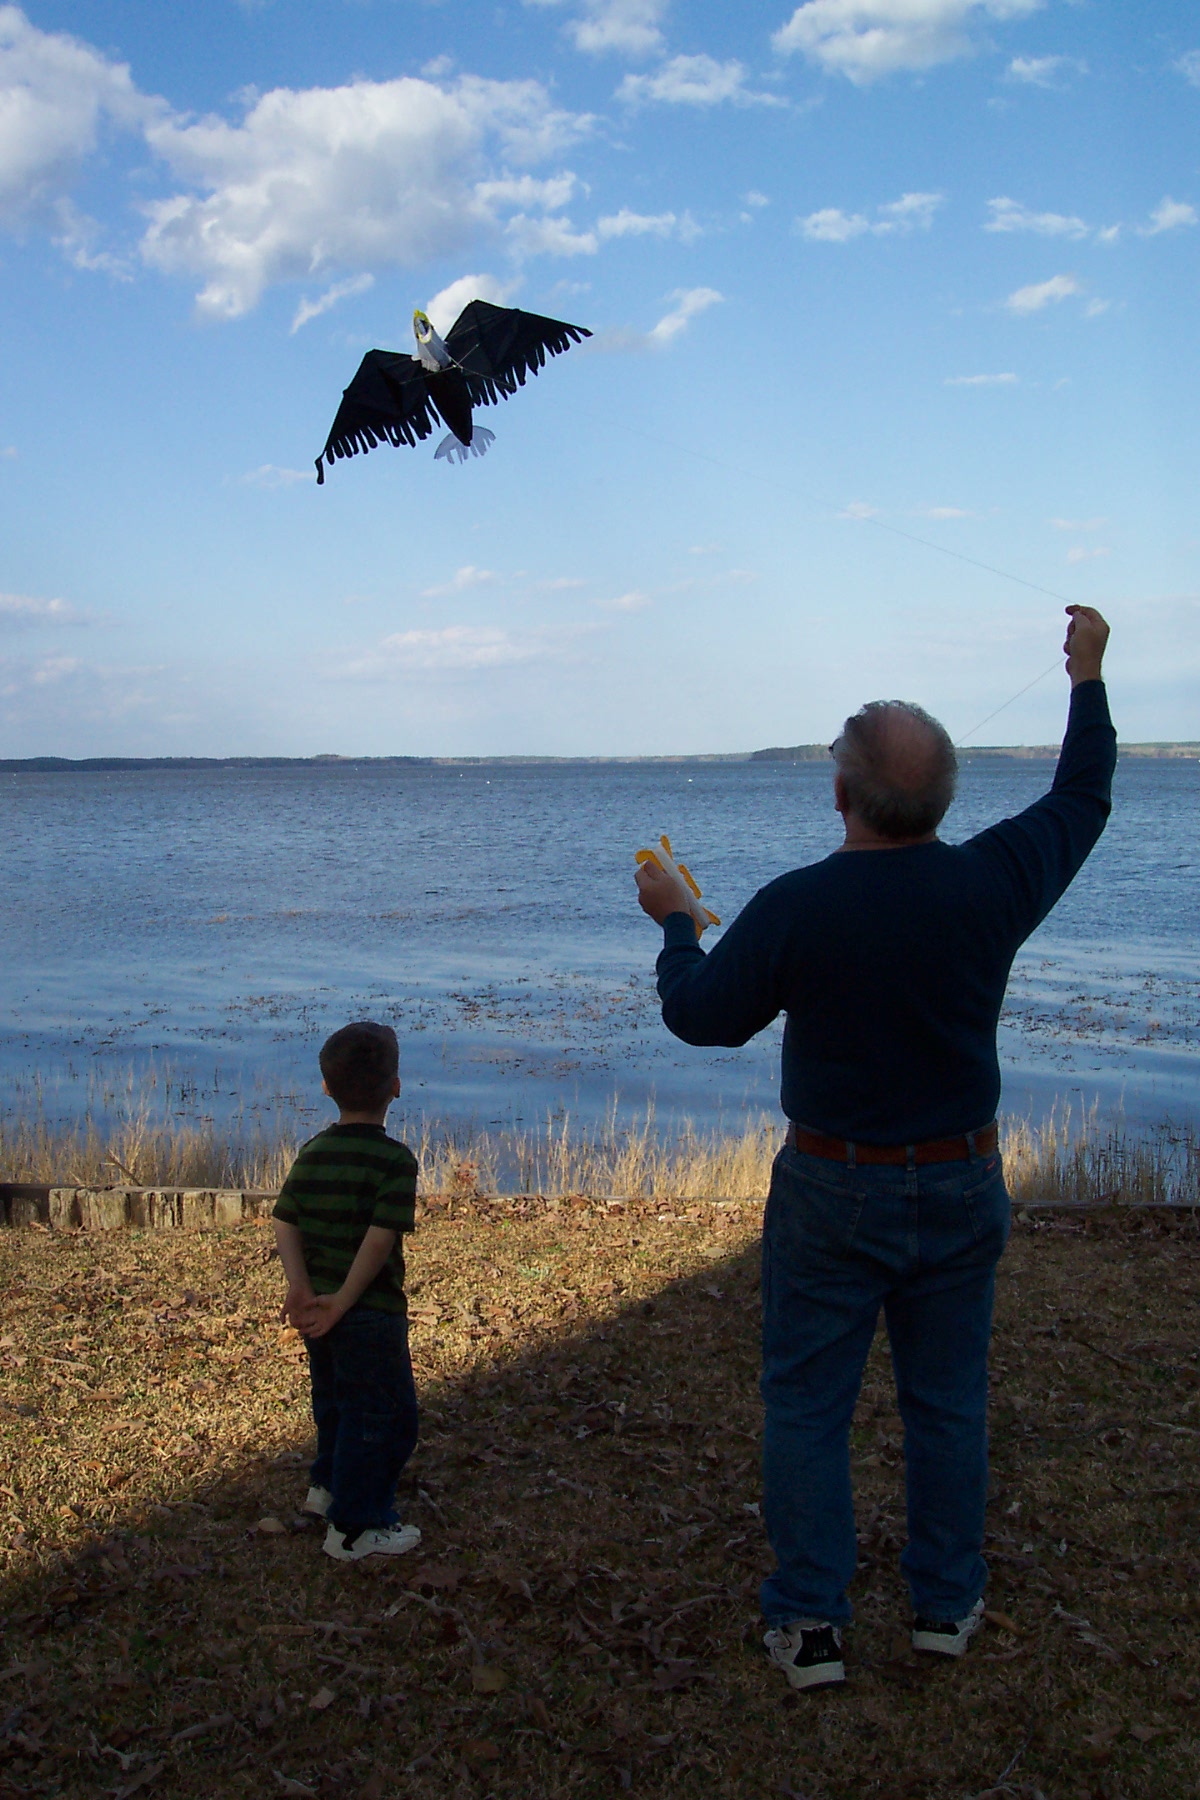 A boy flying a kite with his grandfather at the lake